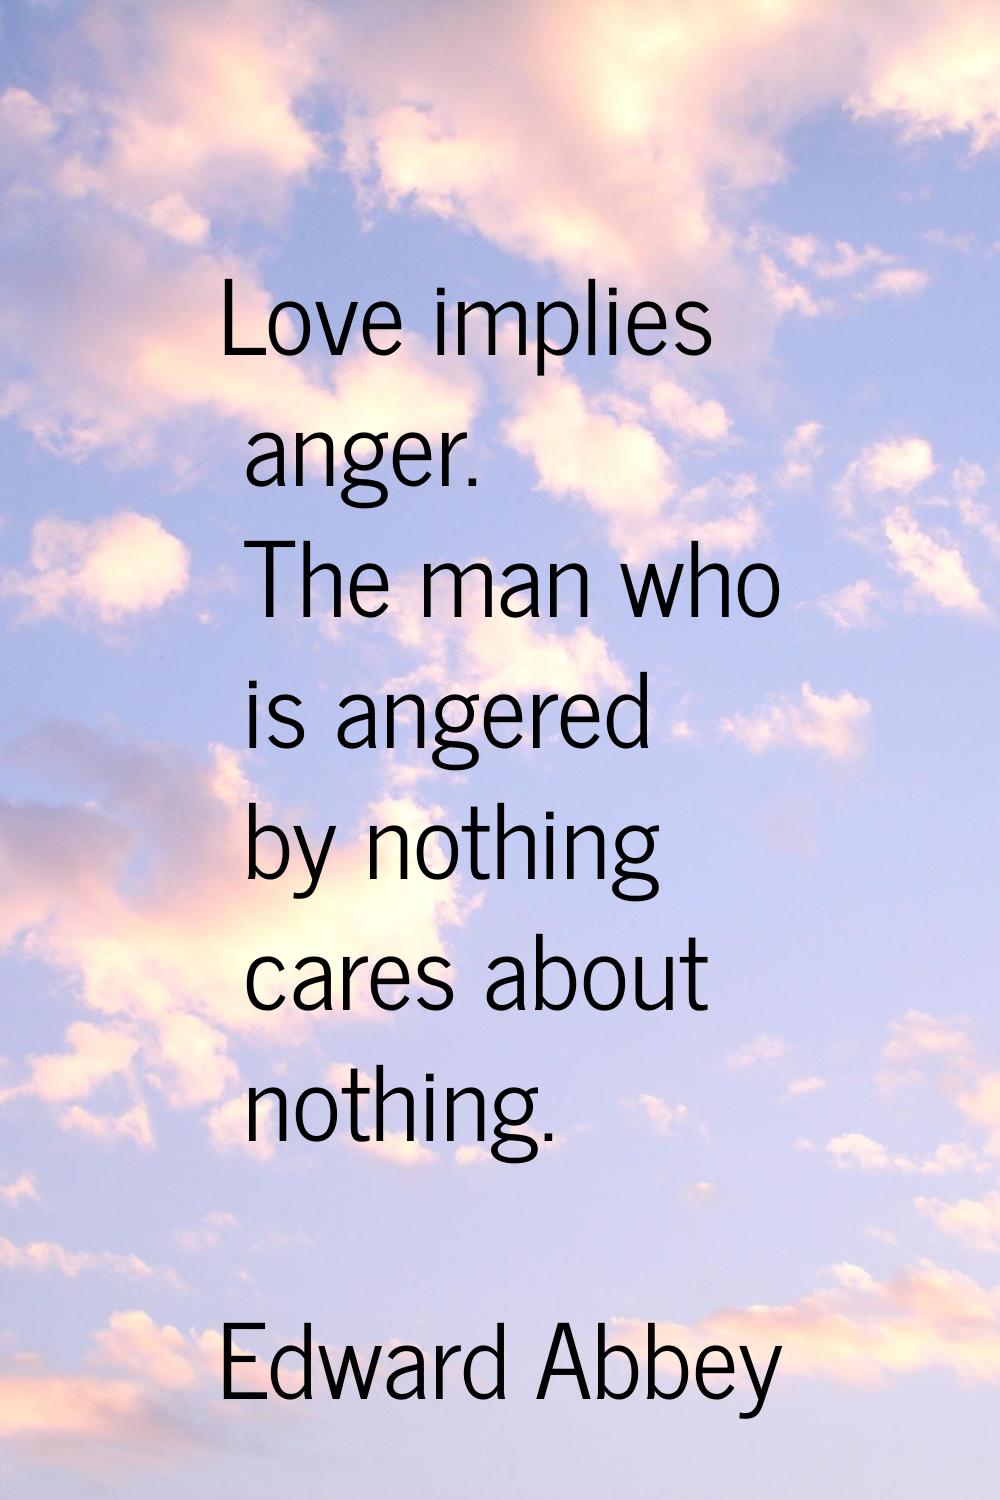 Love implies anger. The man who is angered by nothing cares about nothing.